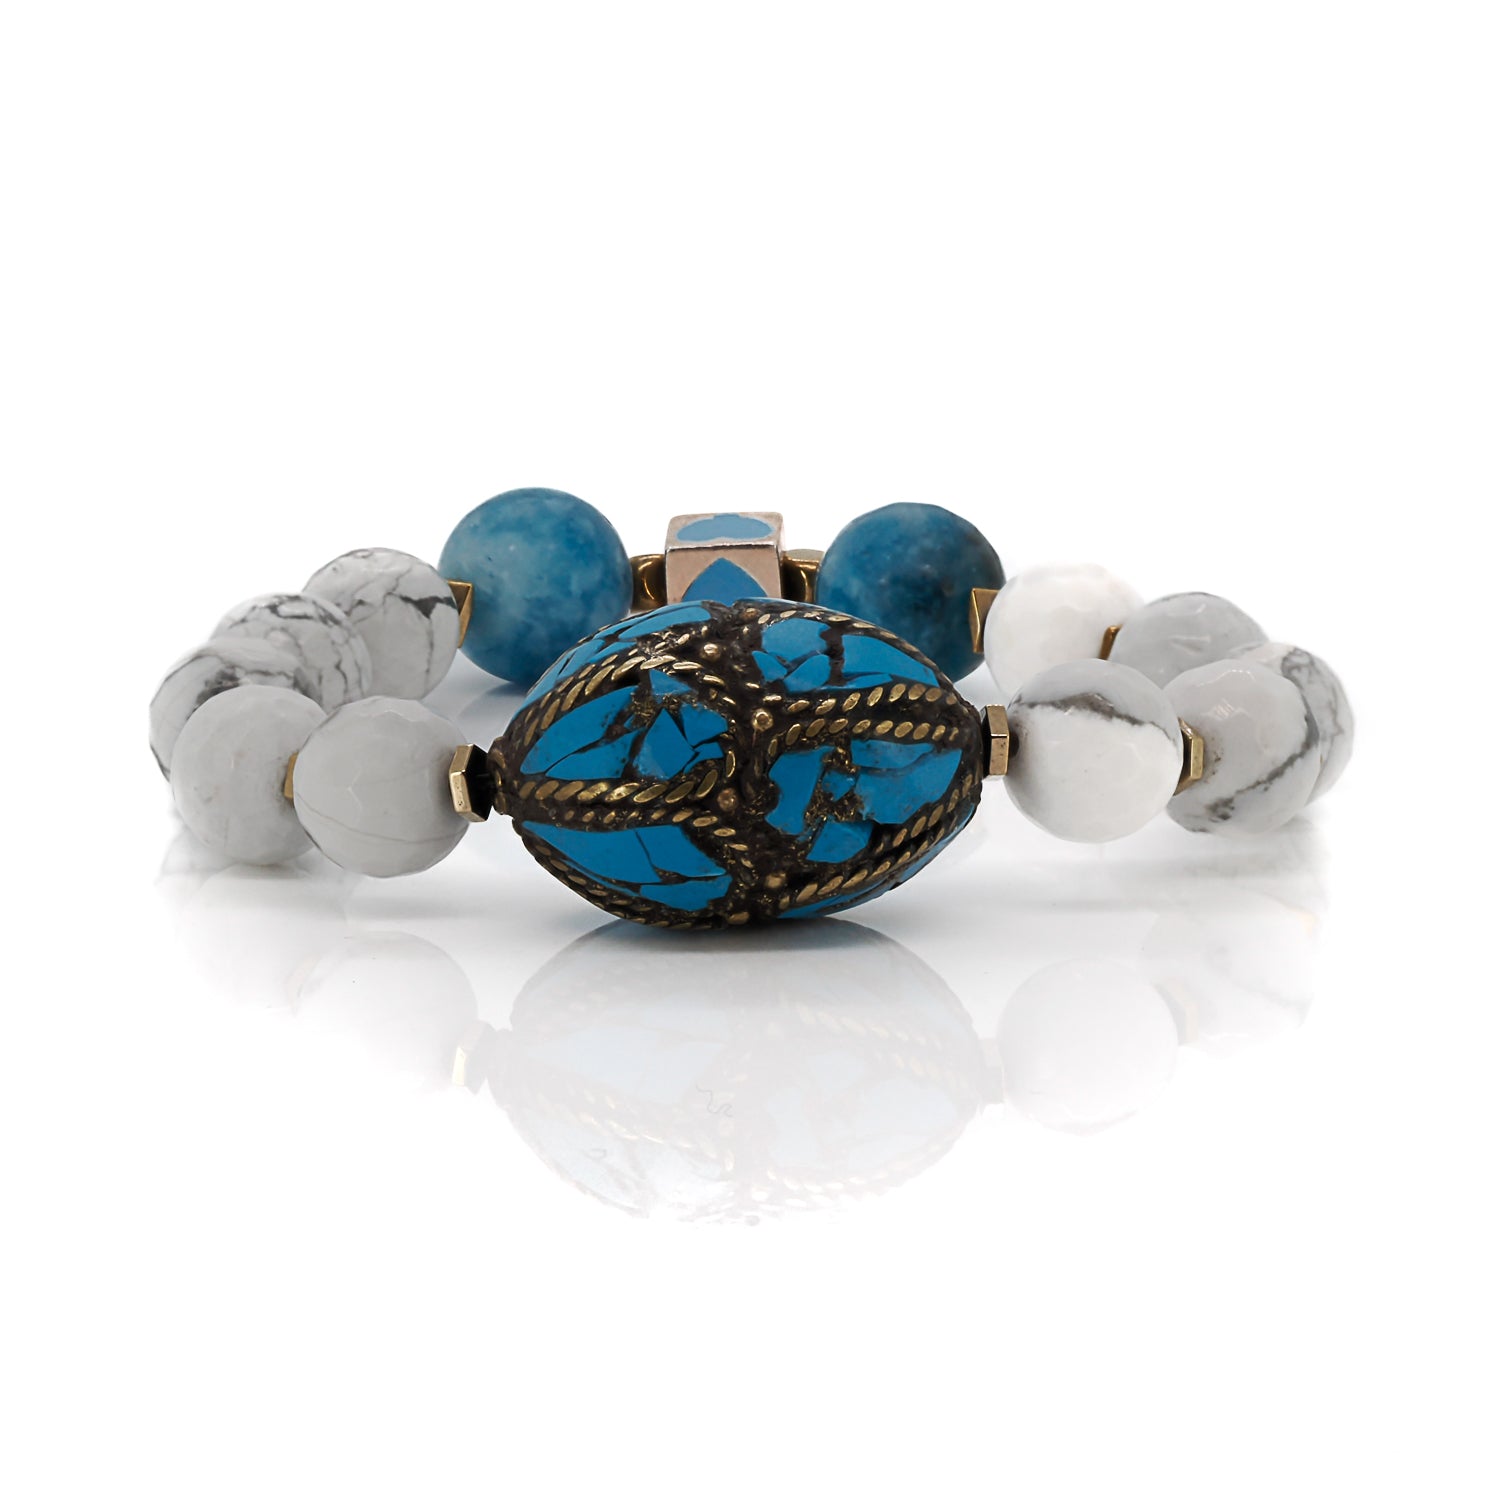 Vibrant Turquoise Stones Symbolizing Tranquility and Protection.